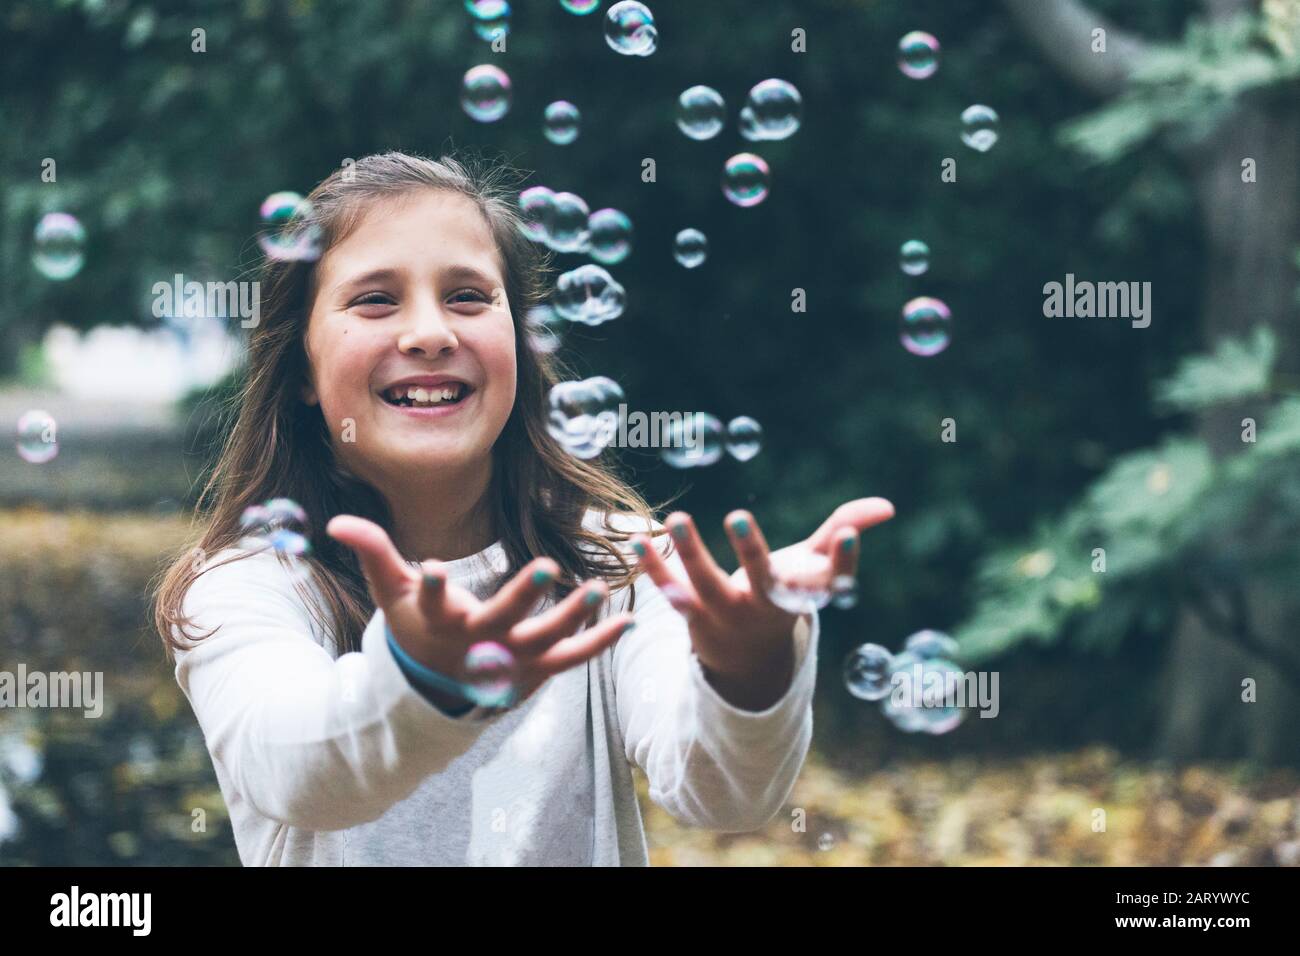 Smiling girl playing with bubbles Stock Photo